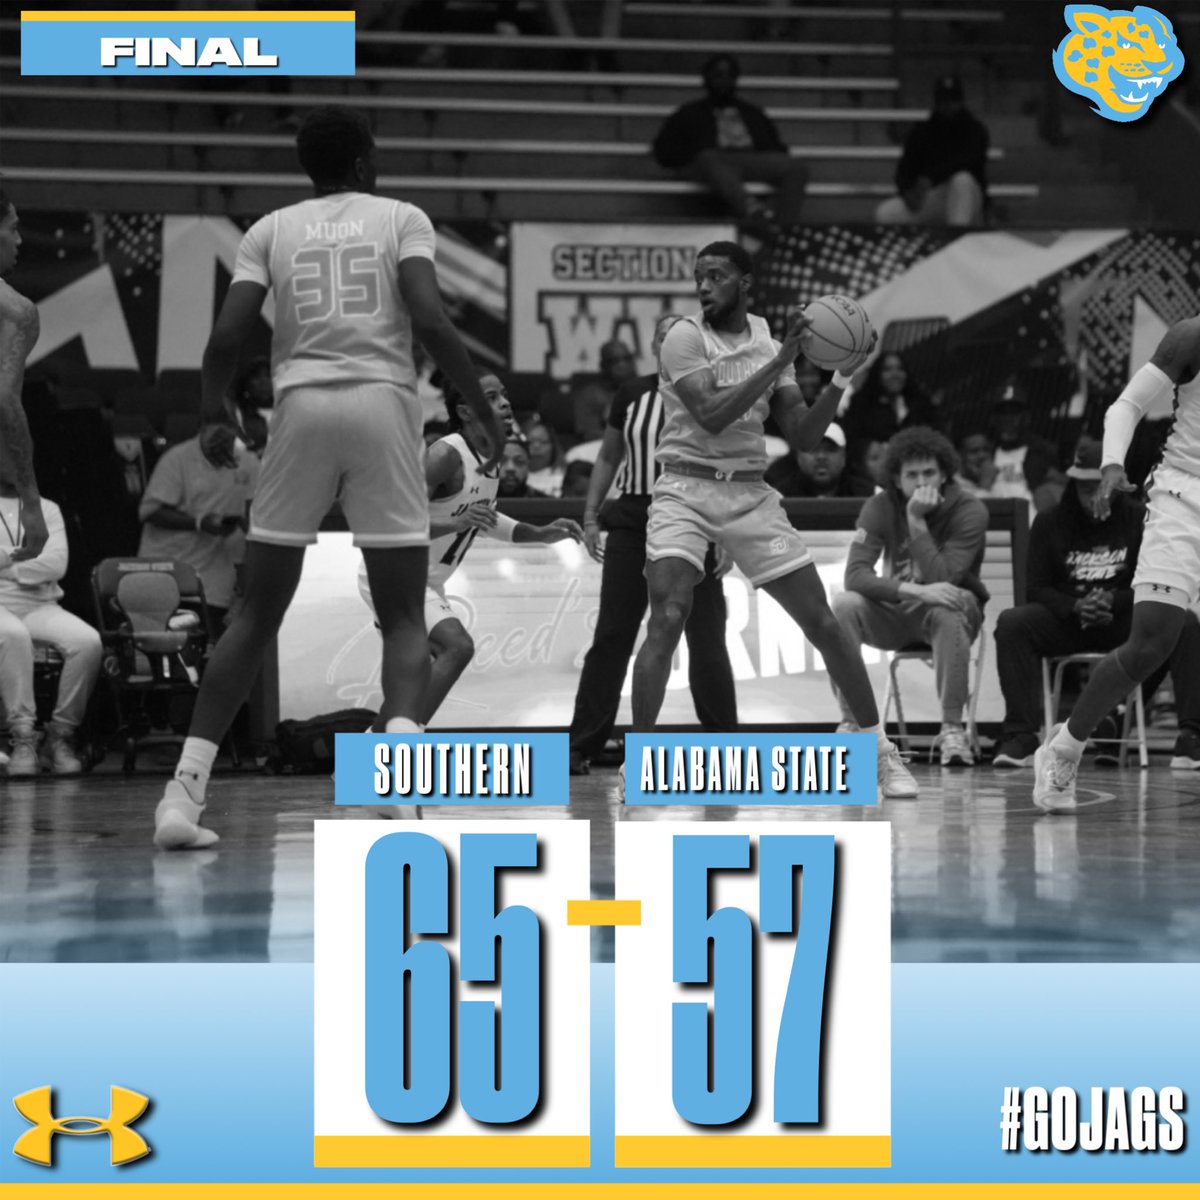 Final from Montgomery Southern - 6️⃣5️⃣ Alabama State - 5️⃣7️⃣ Southern travels to Alabama A&M for the final regular season game on Saturday 3/9 at 4:00 pm #GoJags | #SouthernIsTheStandard | #ProwlOn | #ElevateTheStandard